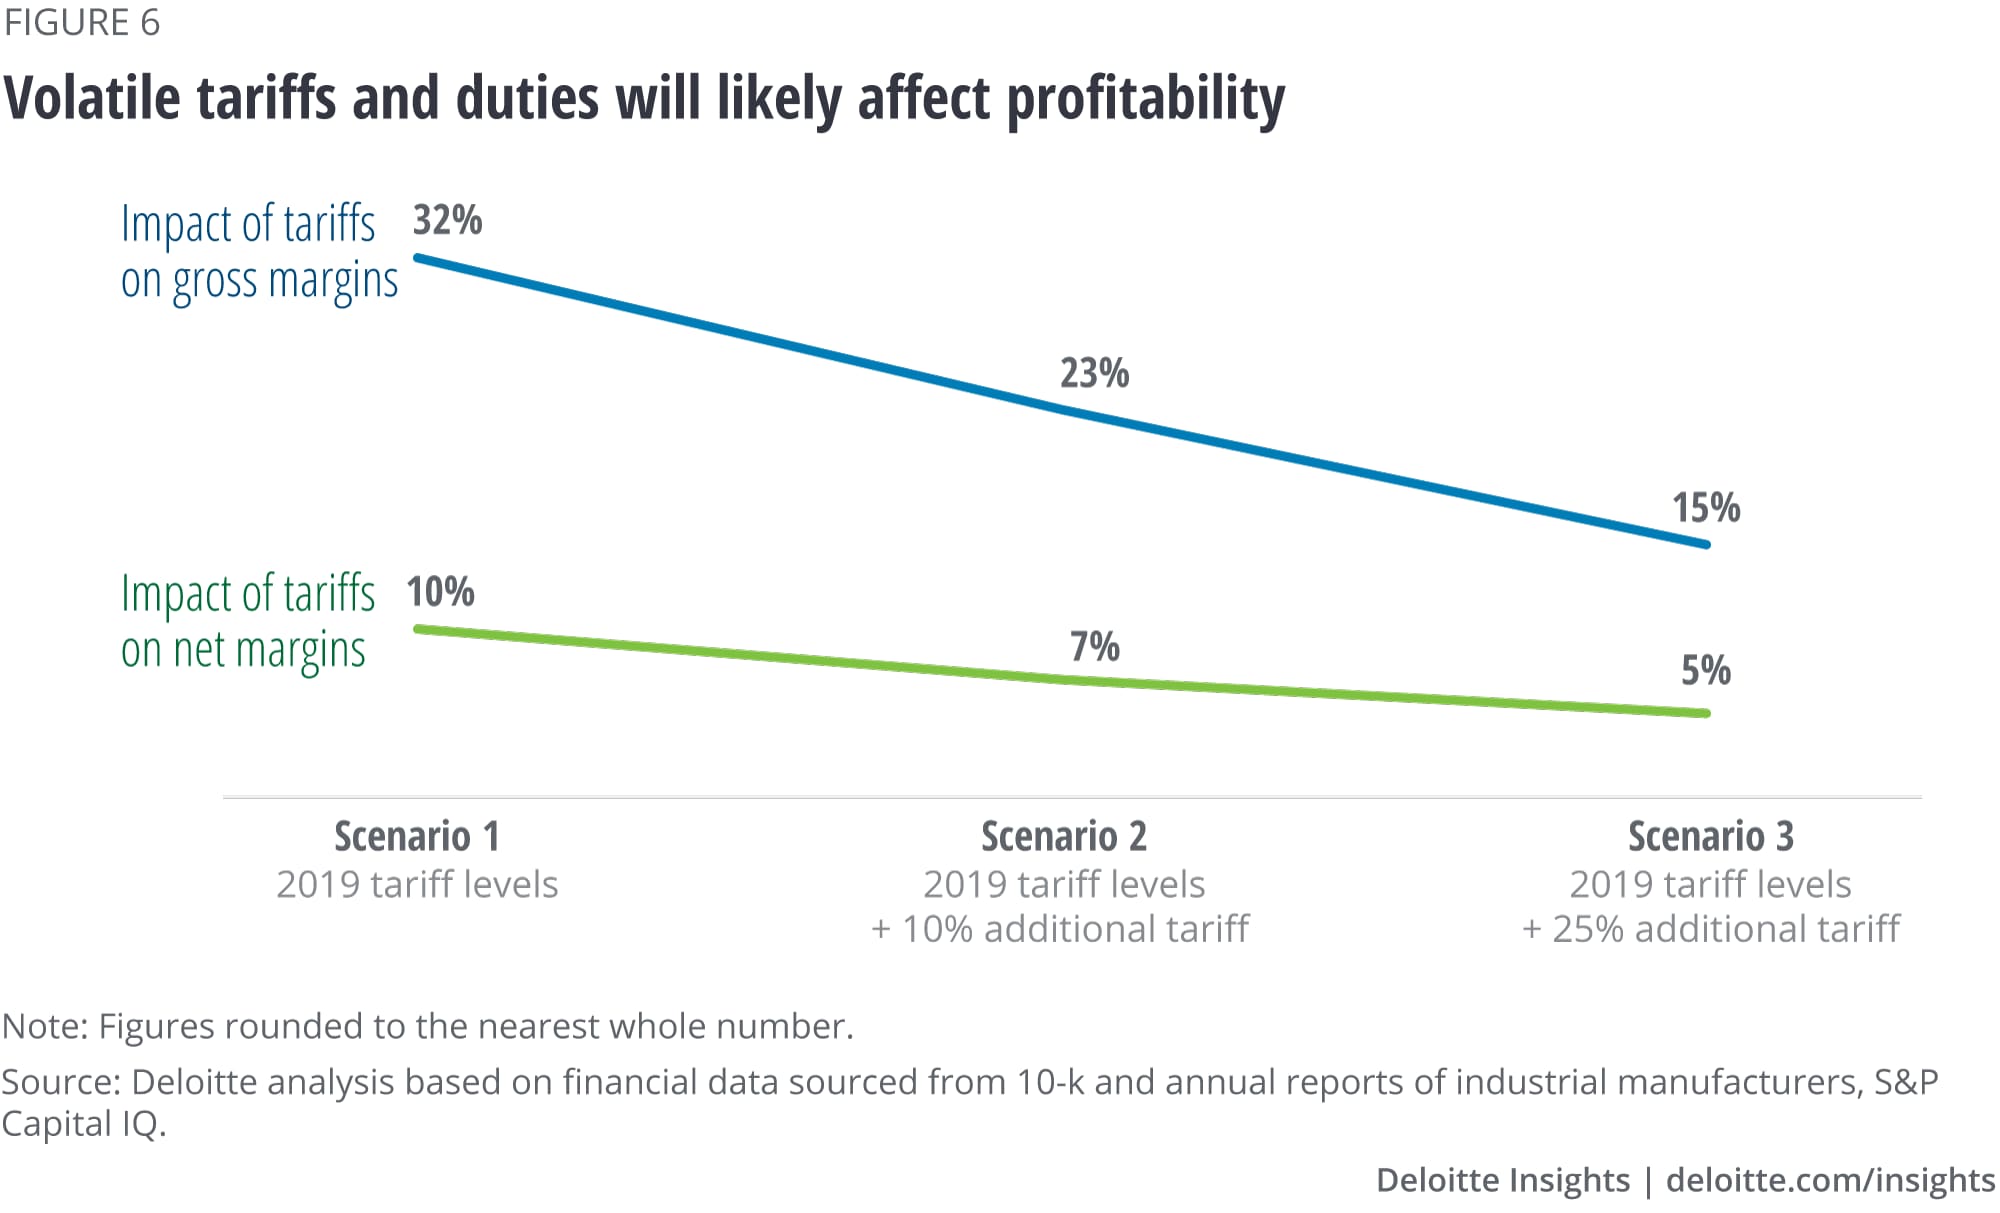 Volatile tariffs and duties will likely affect profitability